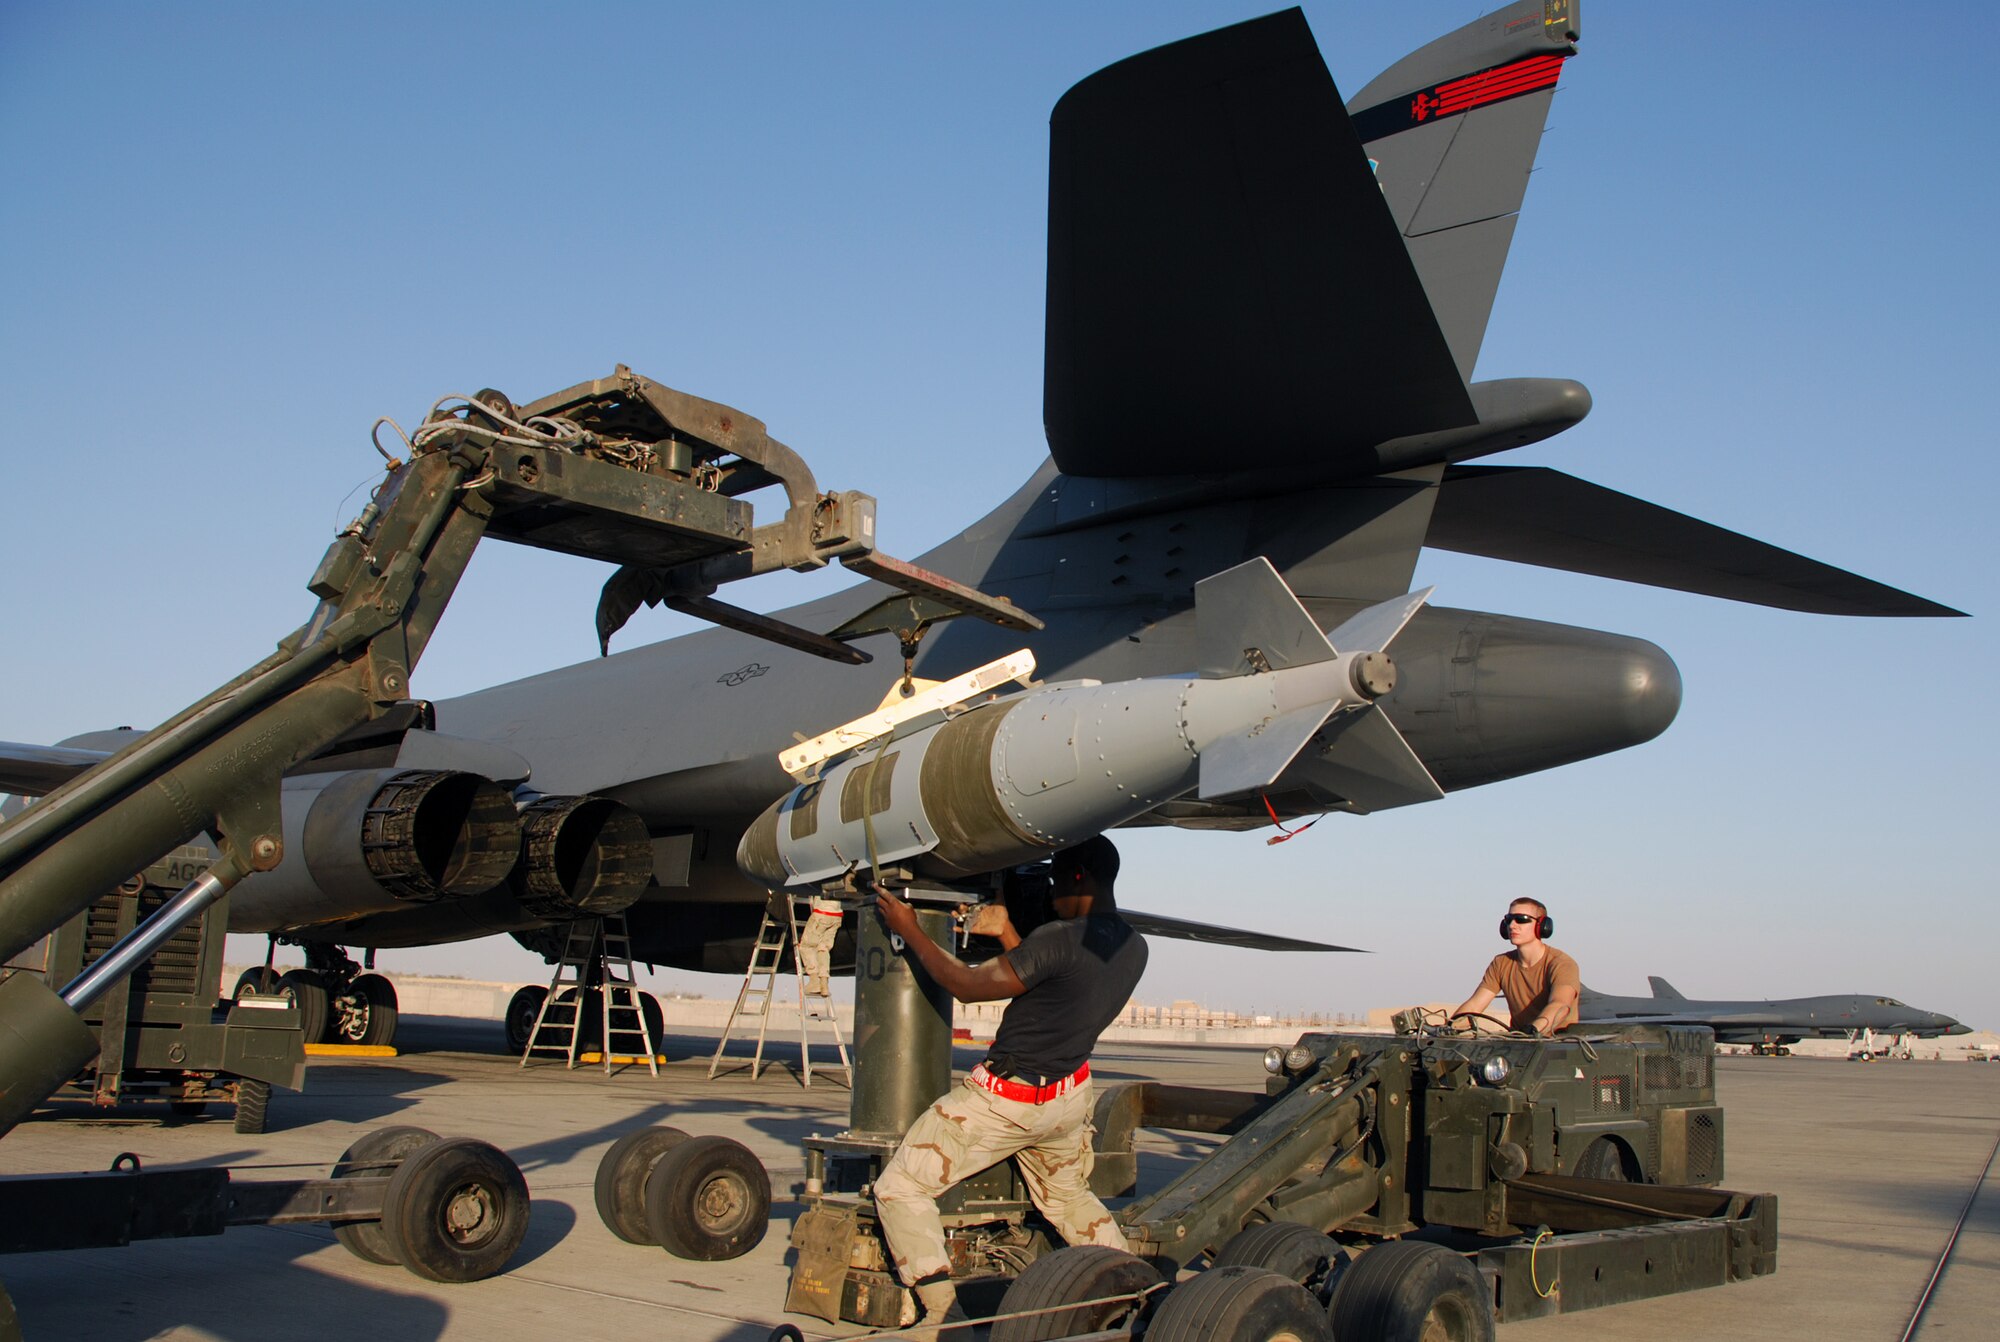 A weapons load crew with the 379th Expeditionary Aircraft Maintenance Squadron at a Southwest Asia air base, loads two 1,000 pound bombs onto a B-1B Lancer. Airman 1st Class Daniel Morton swings a bomb into position on the ram jammer operated by Airman David Pownell. The two Airmen are from Dyess. Airman Morton's home town is Anderson, S. C. AirmanPownell is from Appleton, Wisc. (United States Air Force photo by Staff Sergeant Douglas C. Olsen)